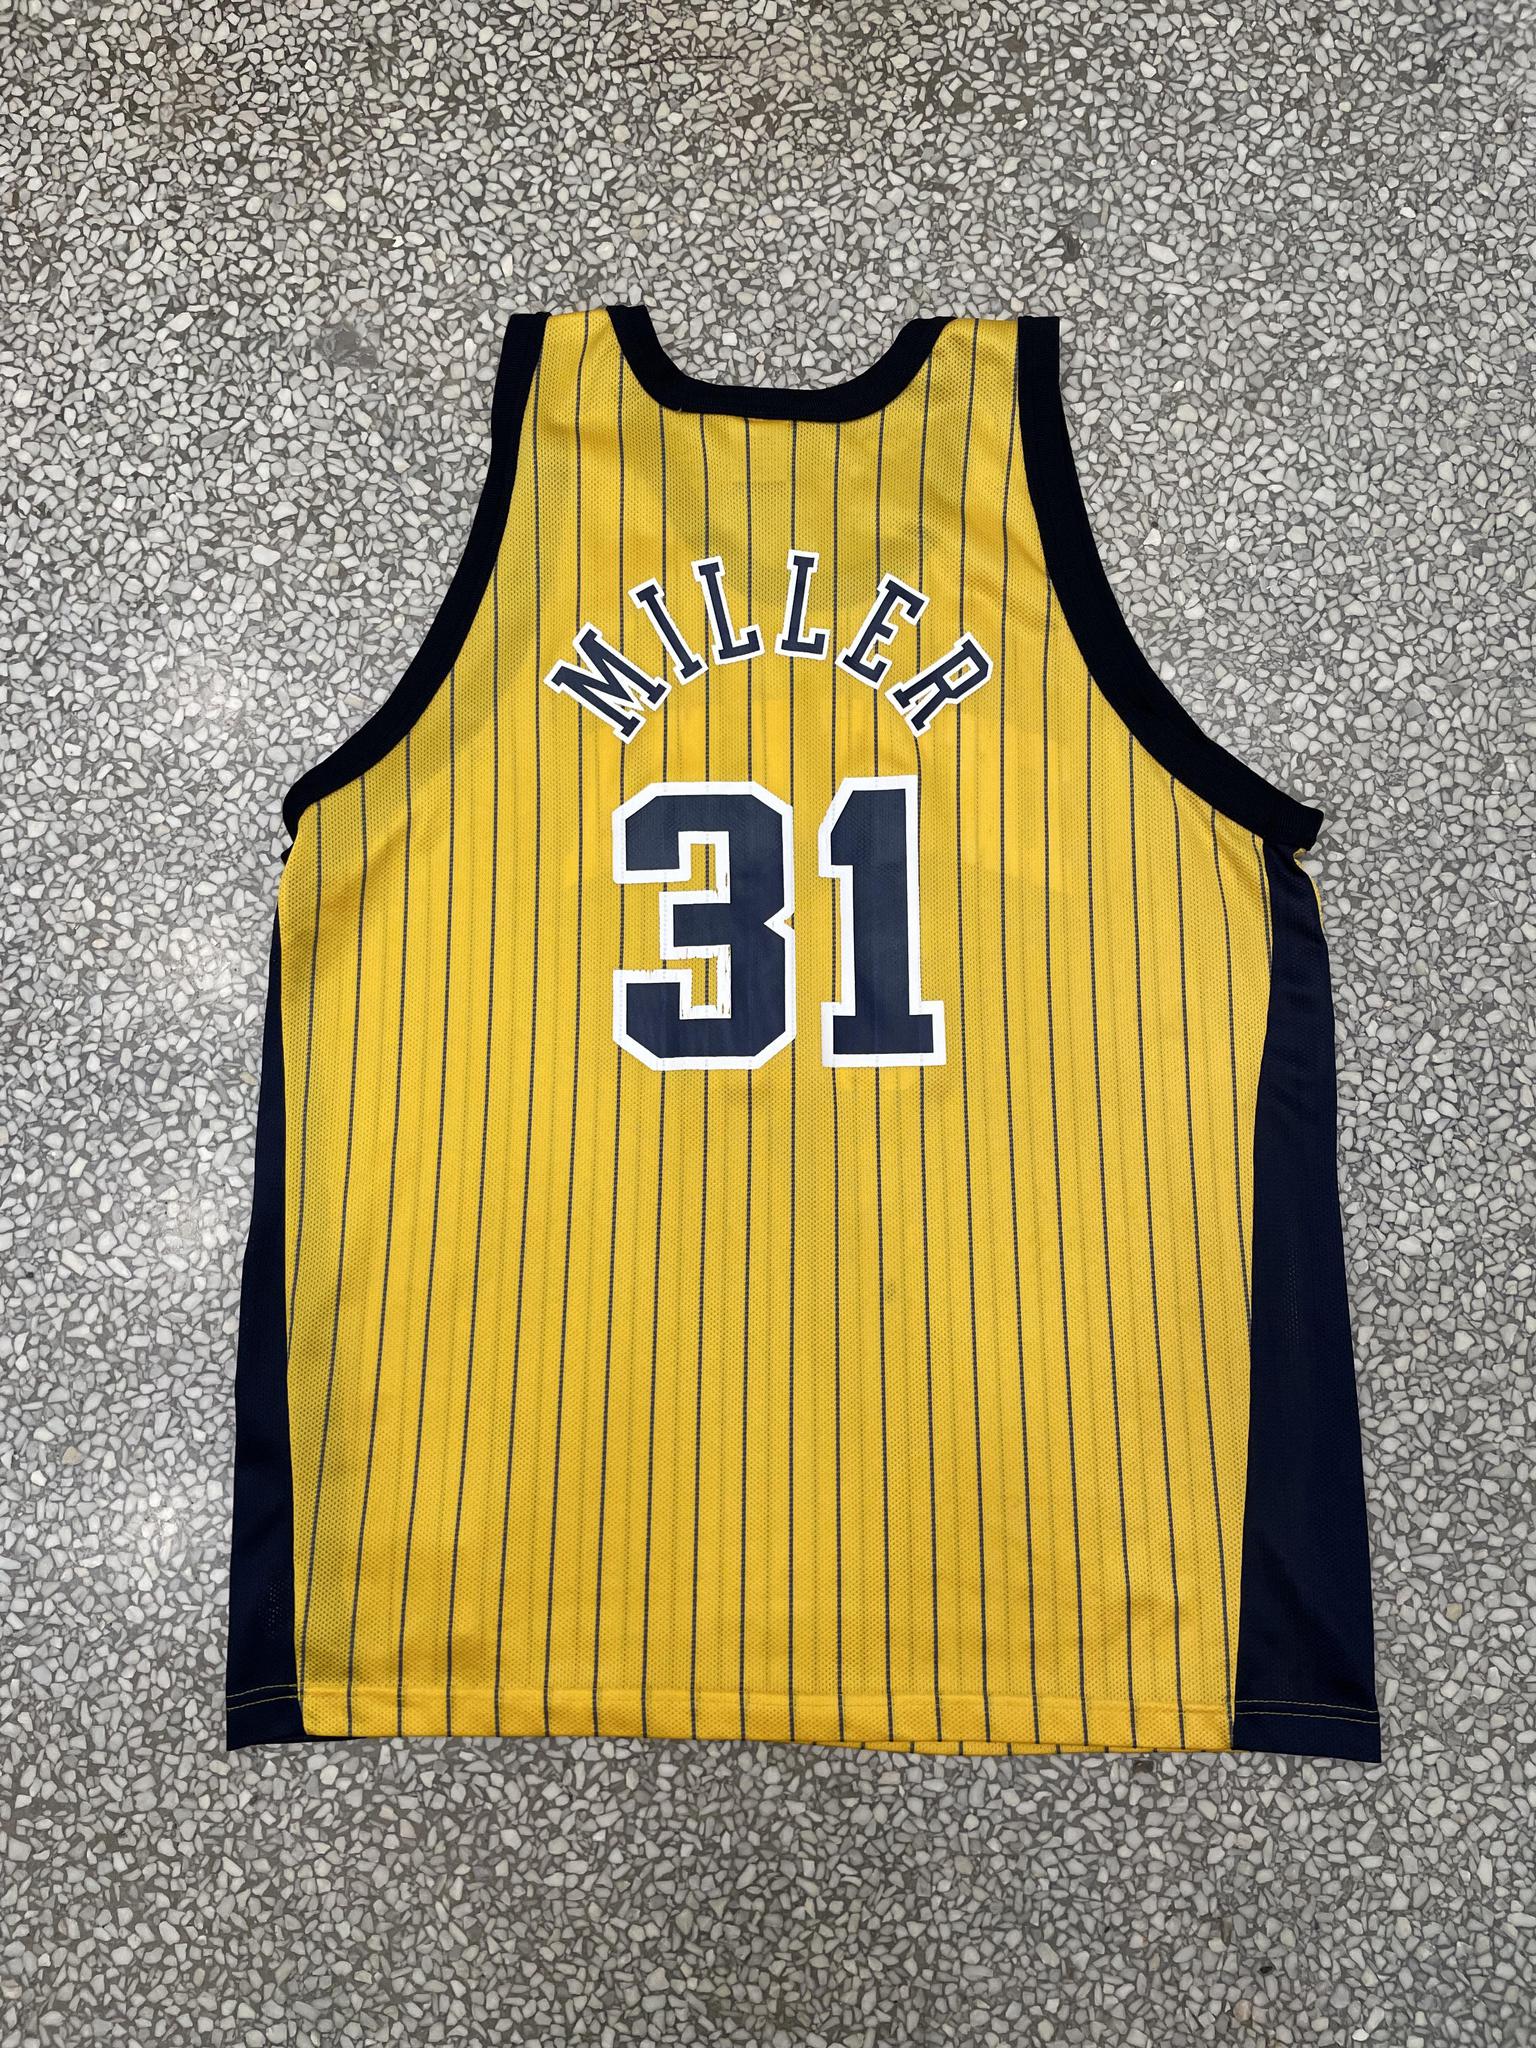 yellow pacers jersey